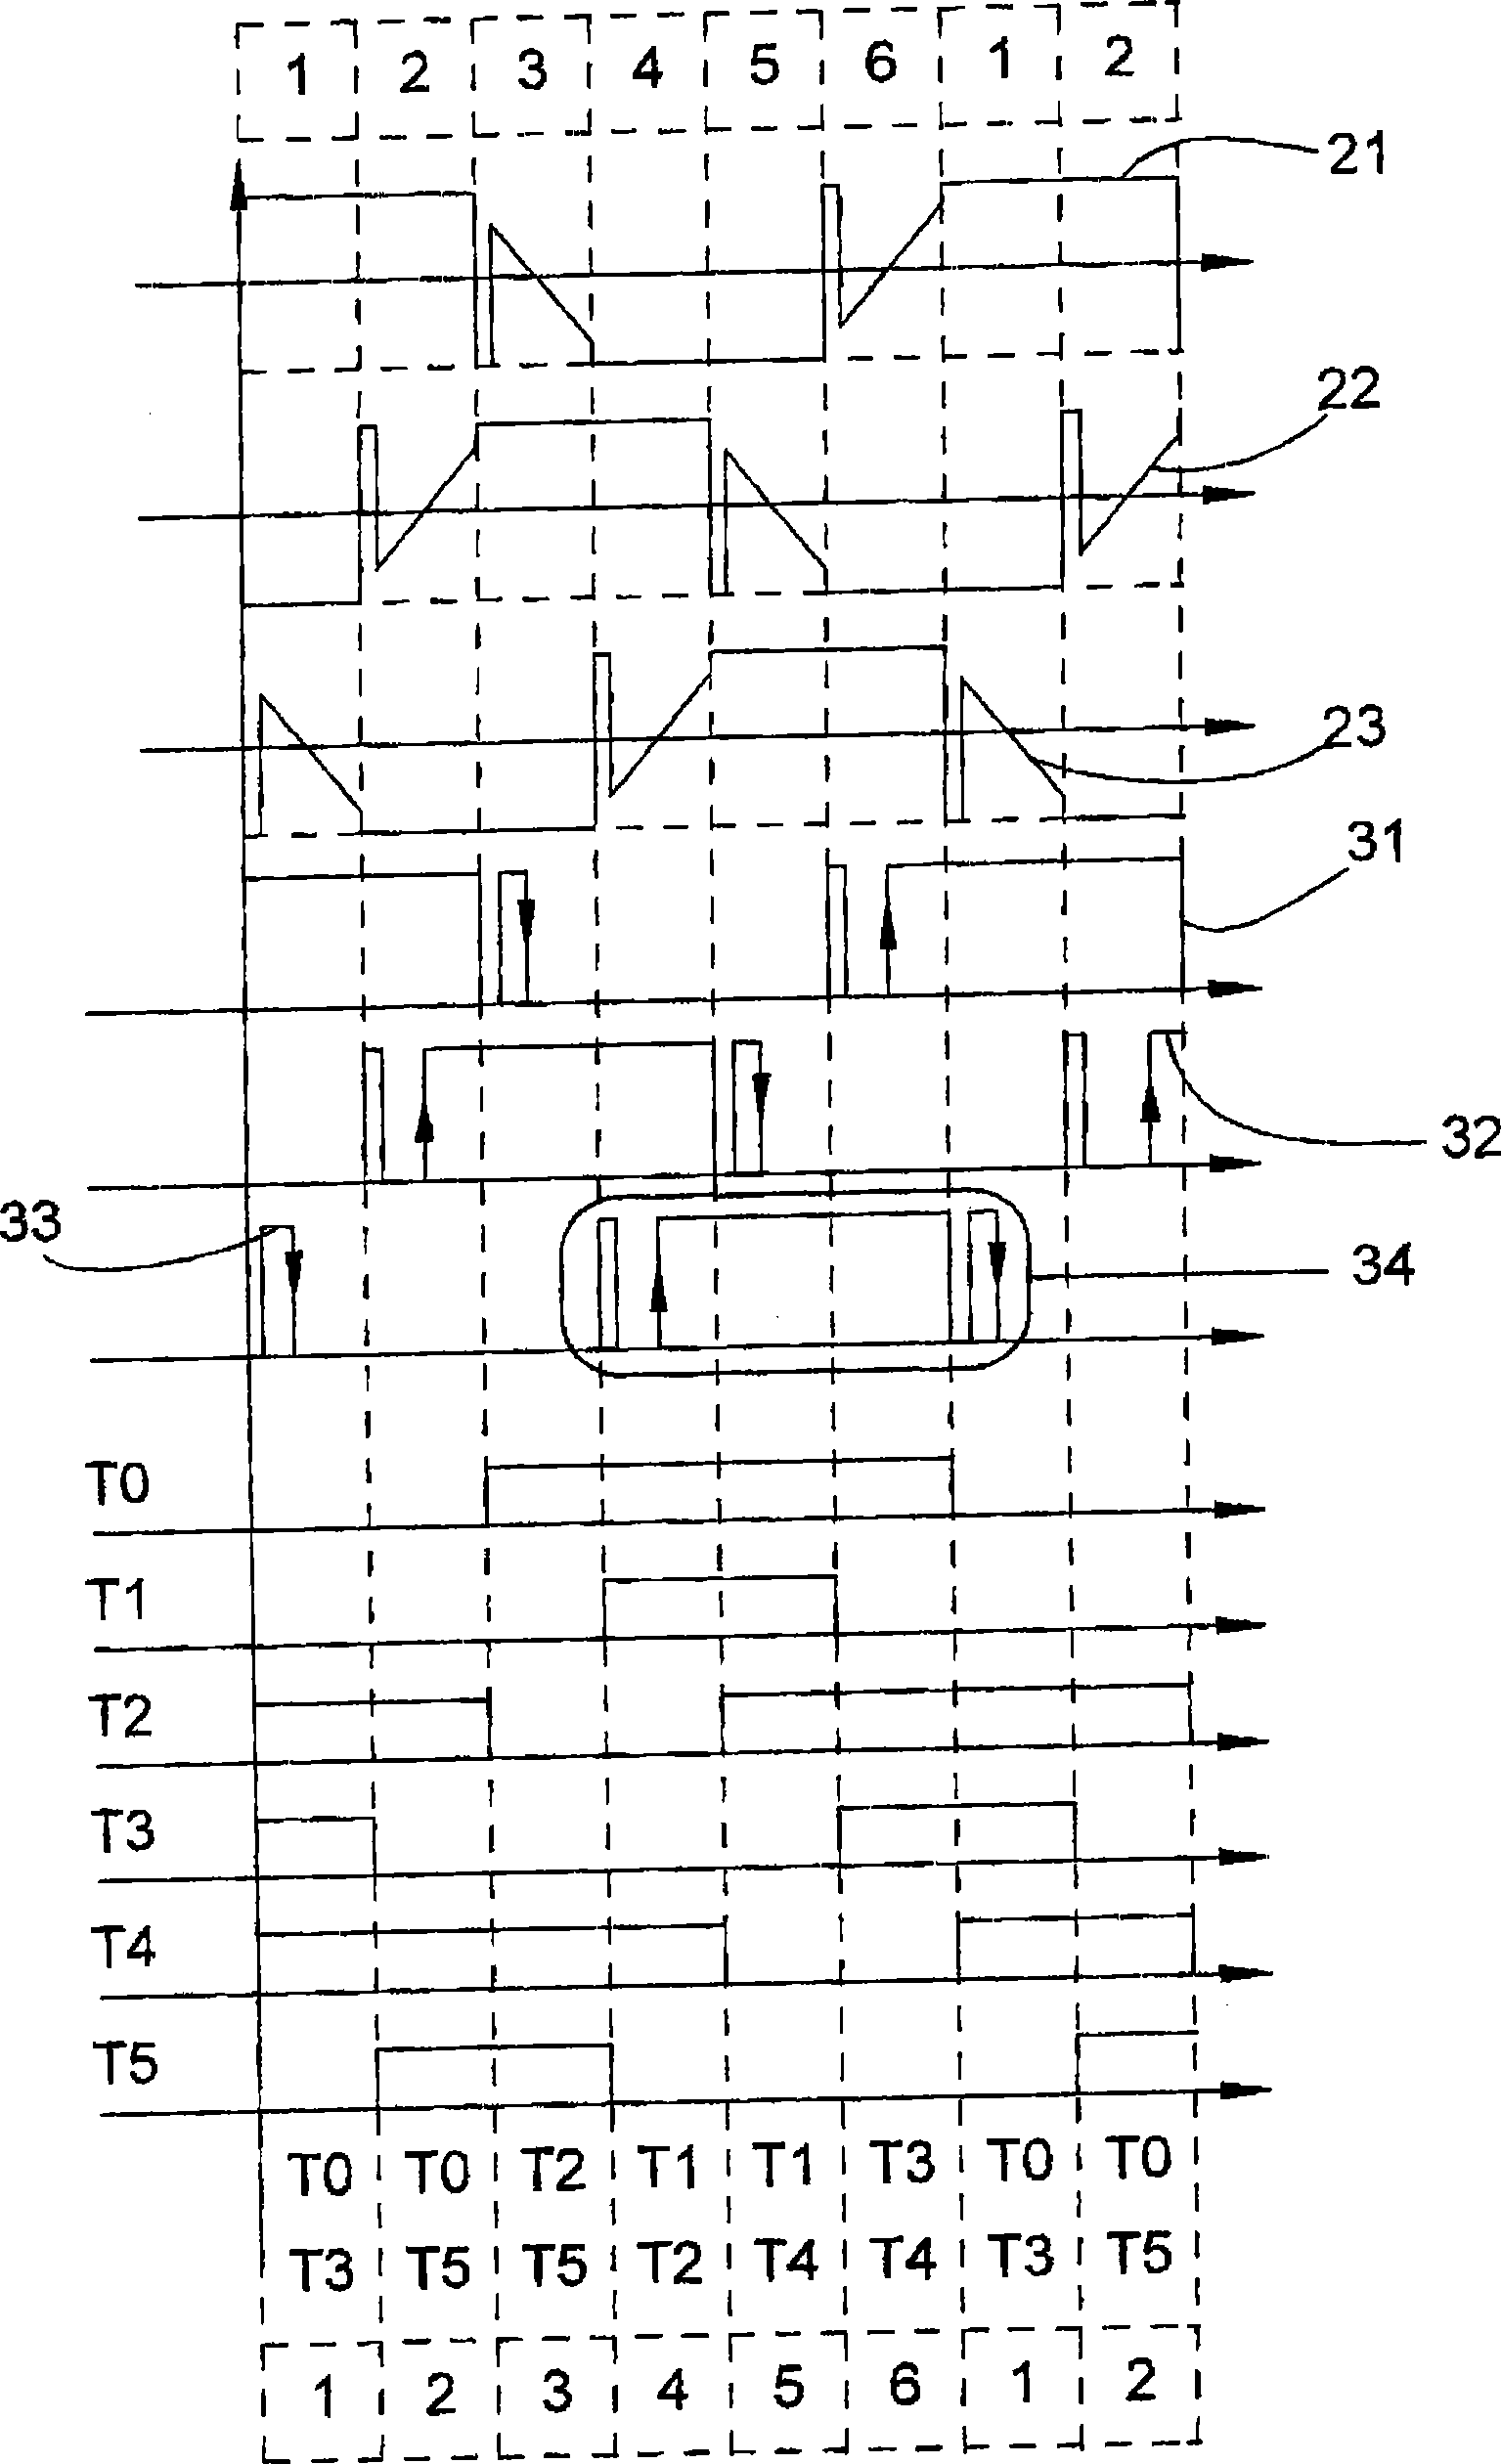 Electronically commutated direct current machine sensor-less operation